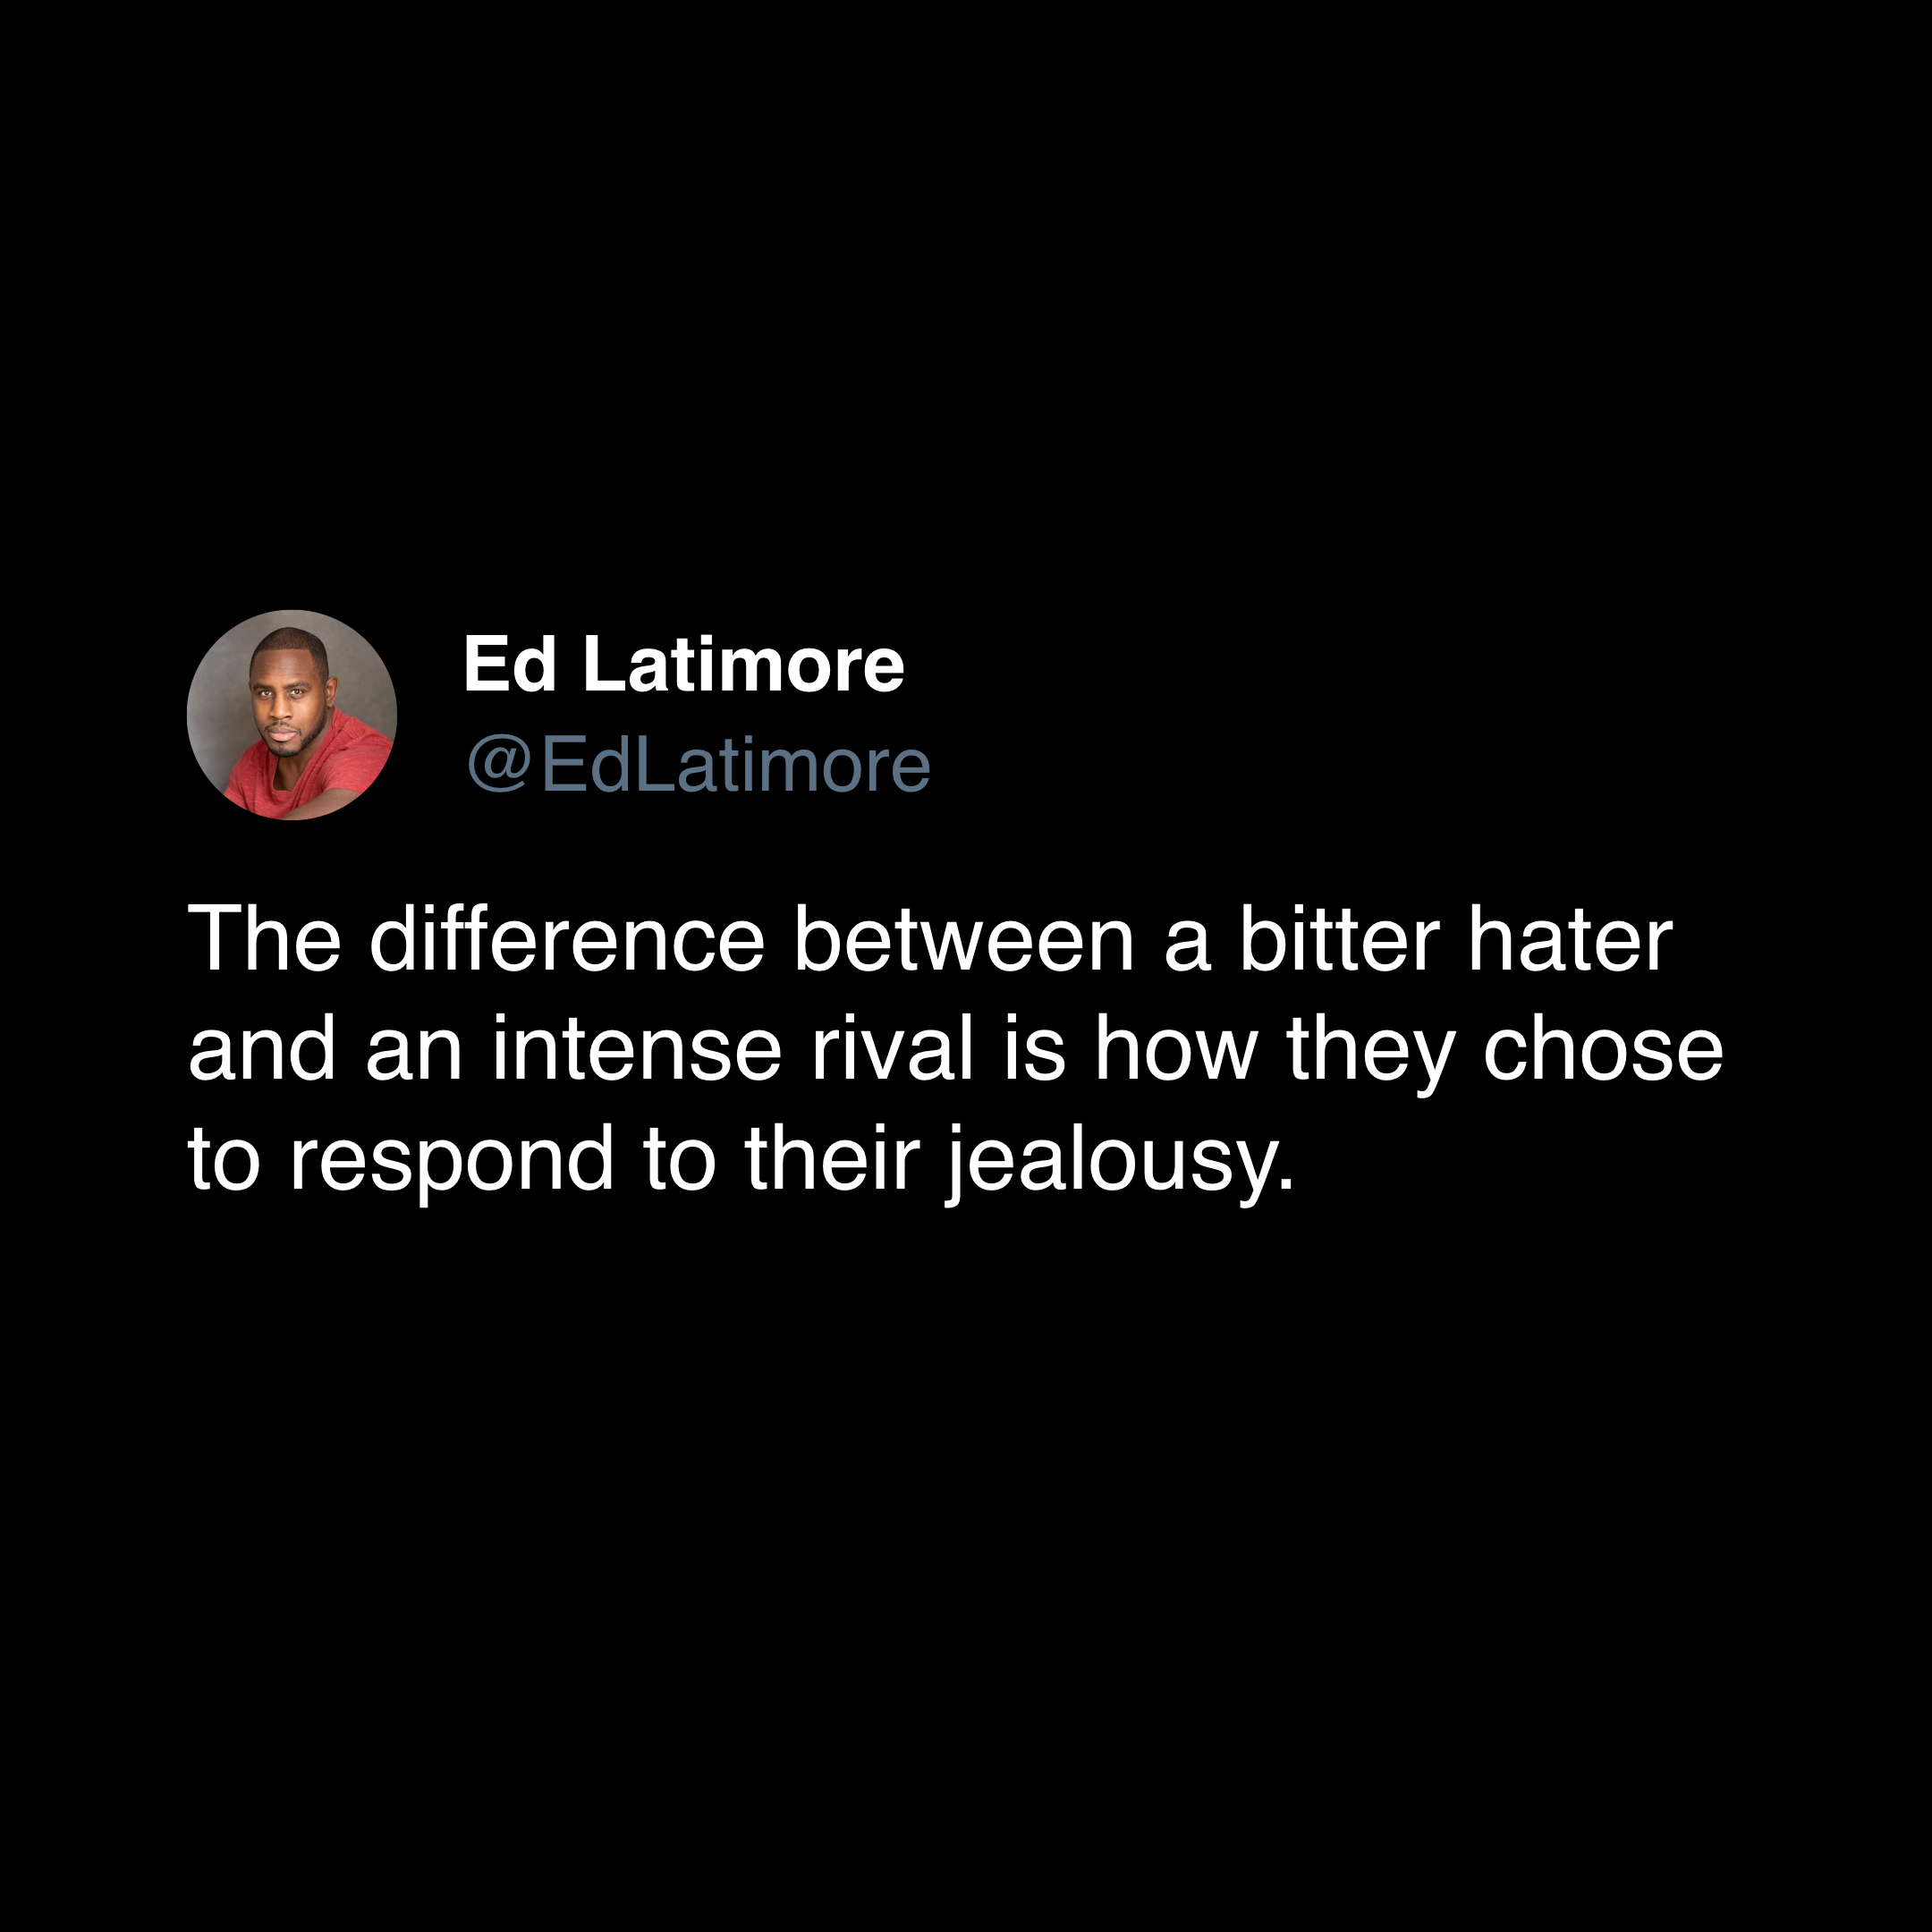 ed latimore hater quote "difference between hater and rival"